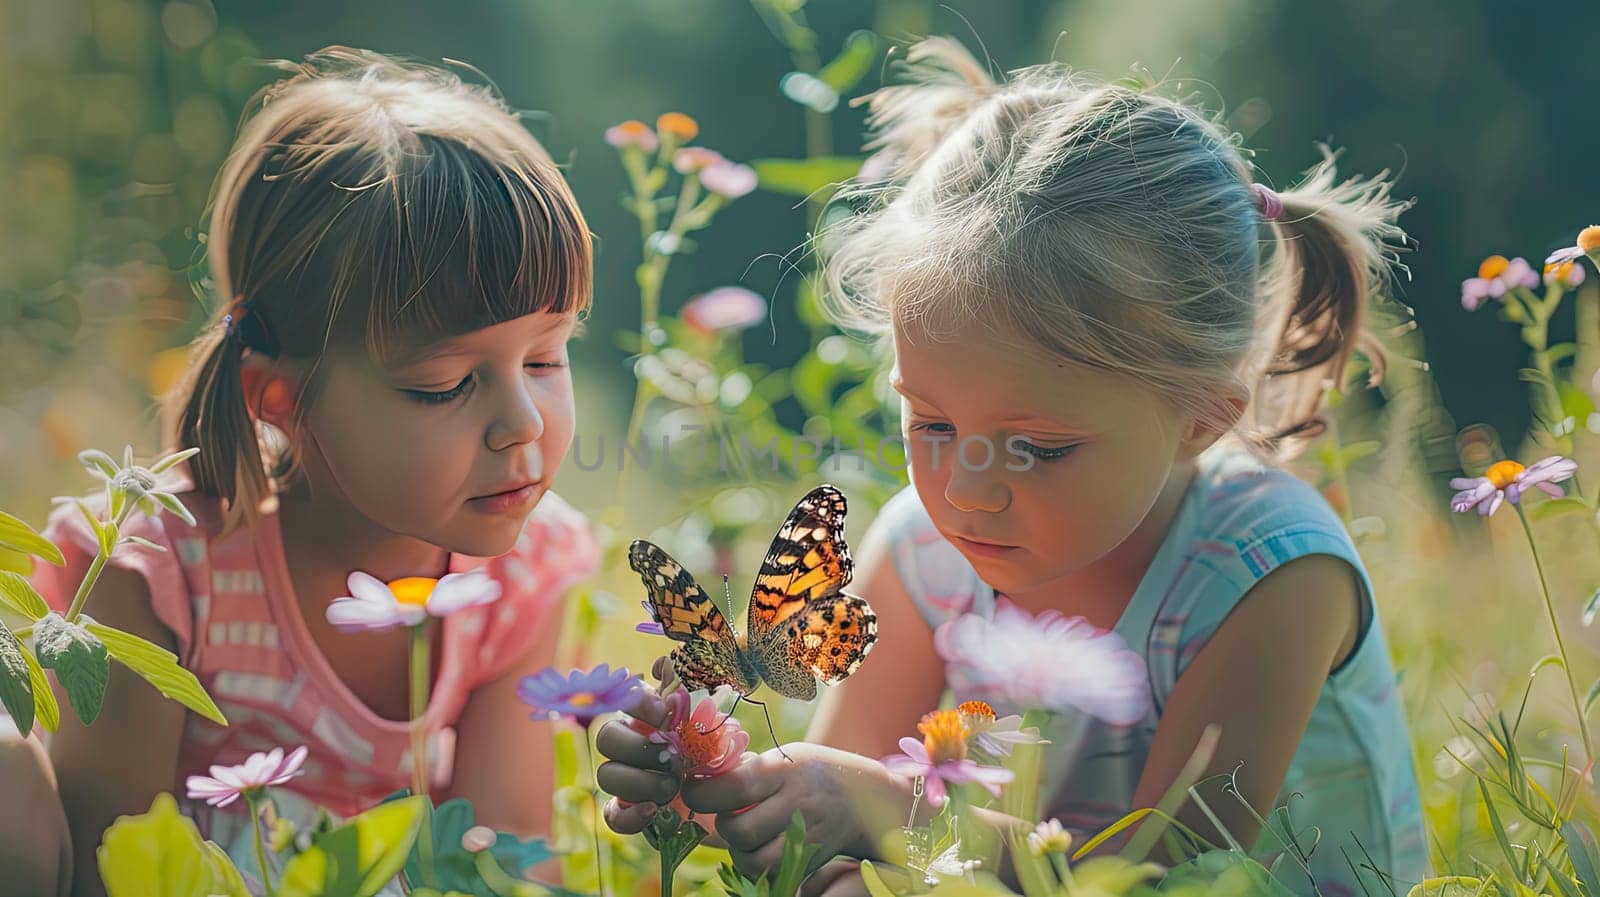 Children look at a butterfly in the garden. Selective focus. Kid.